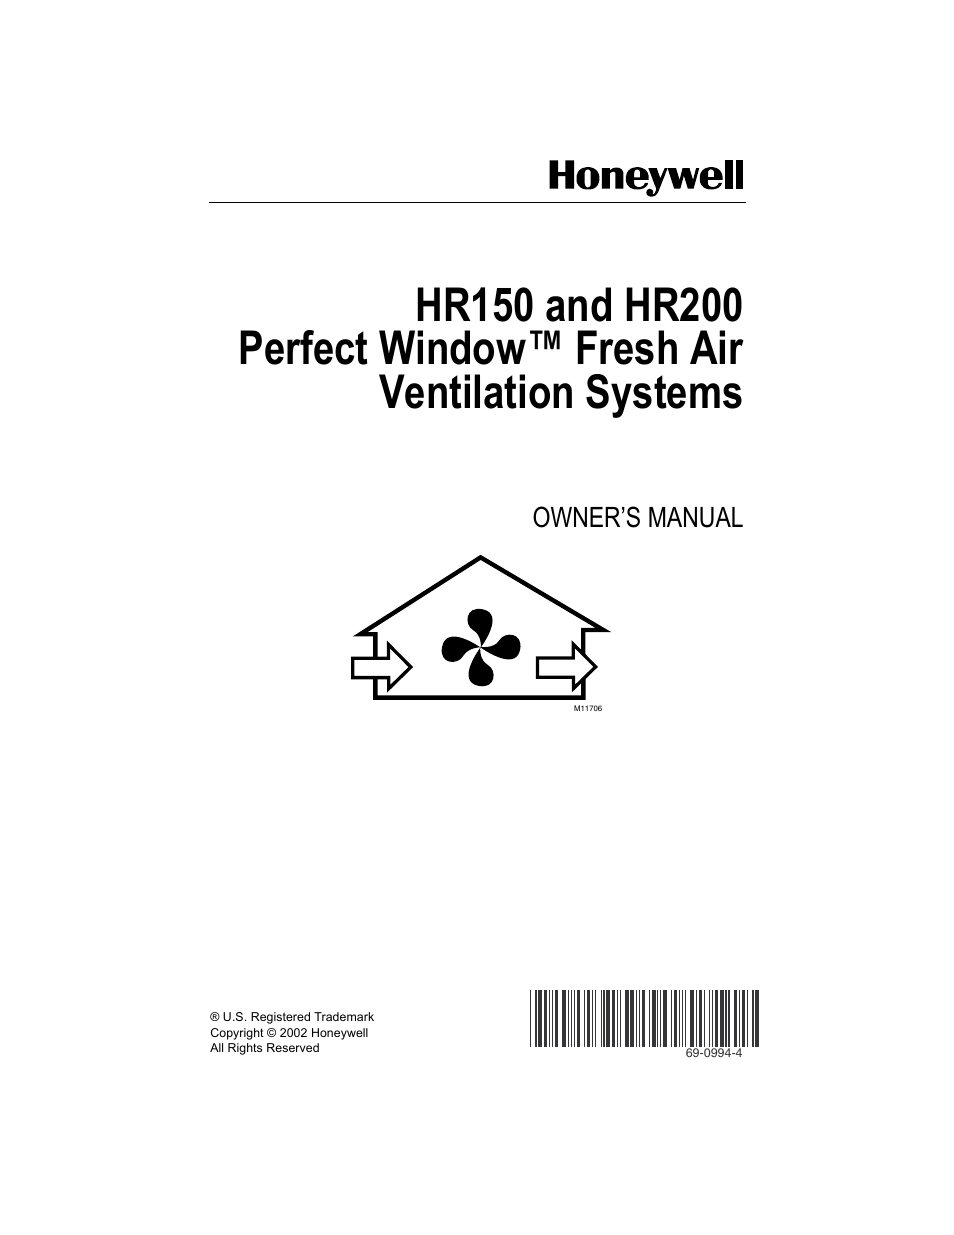 Honeywell PERFECT WINDOW HR150 User Manual | 12 pages